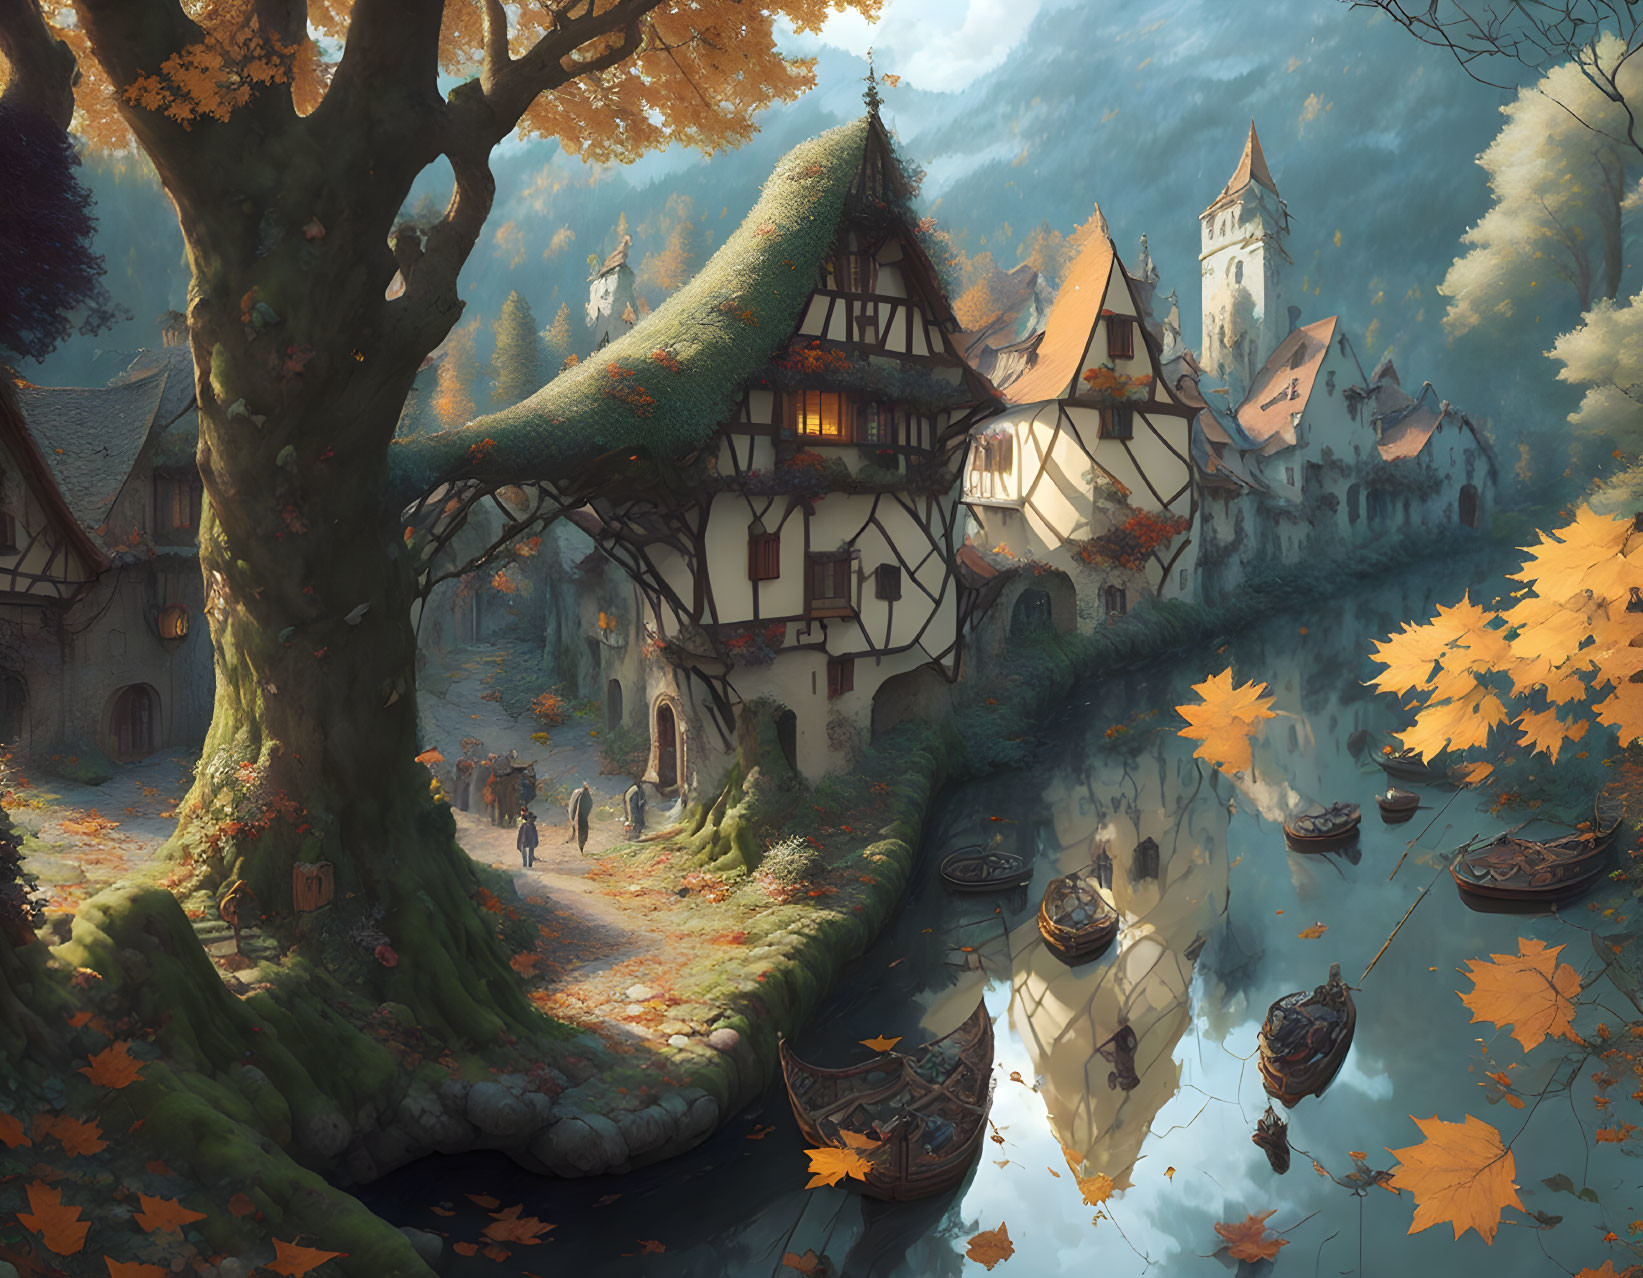 Medieval village with half-timbered homes, river, castle, autumn trees